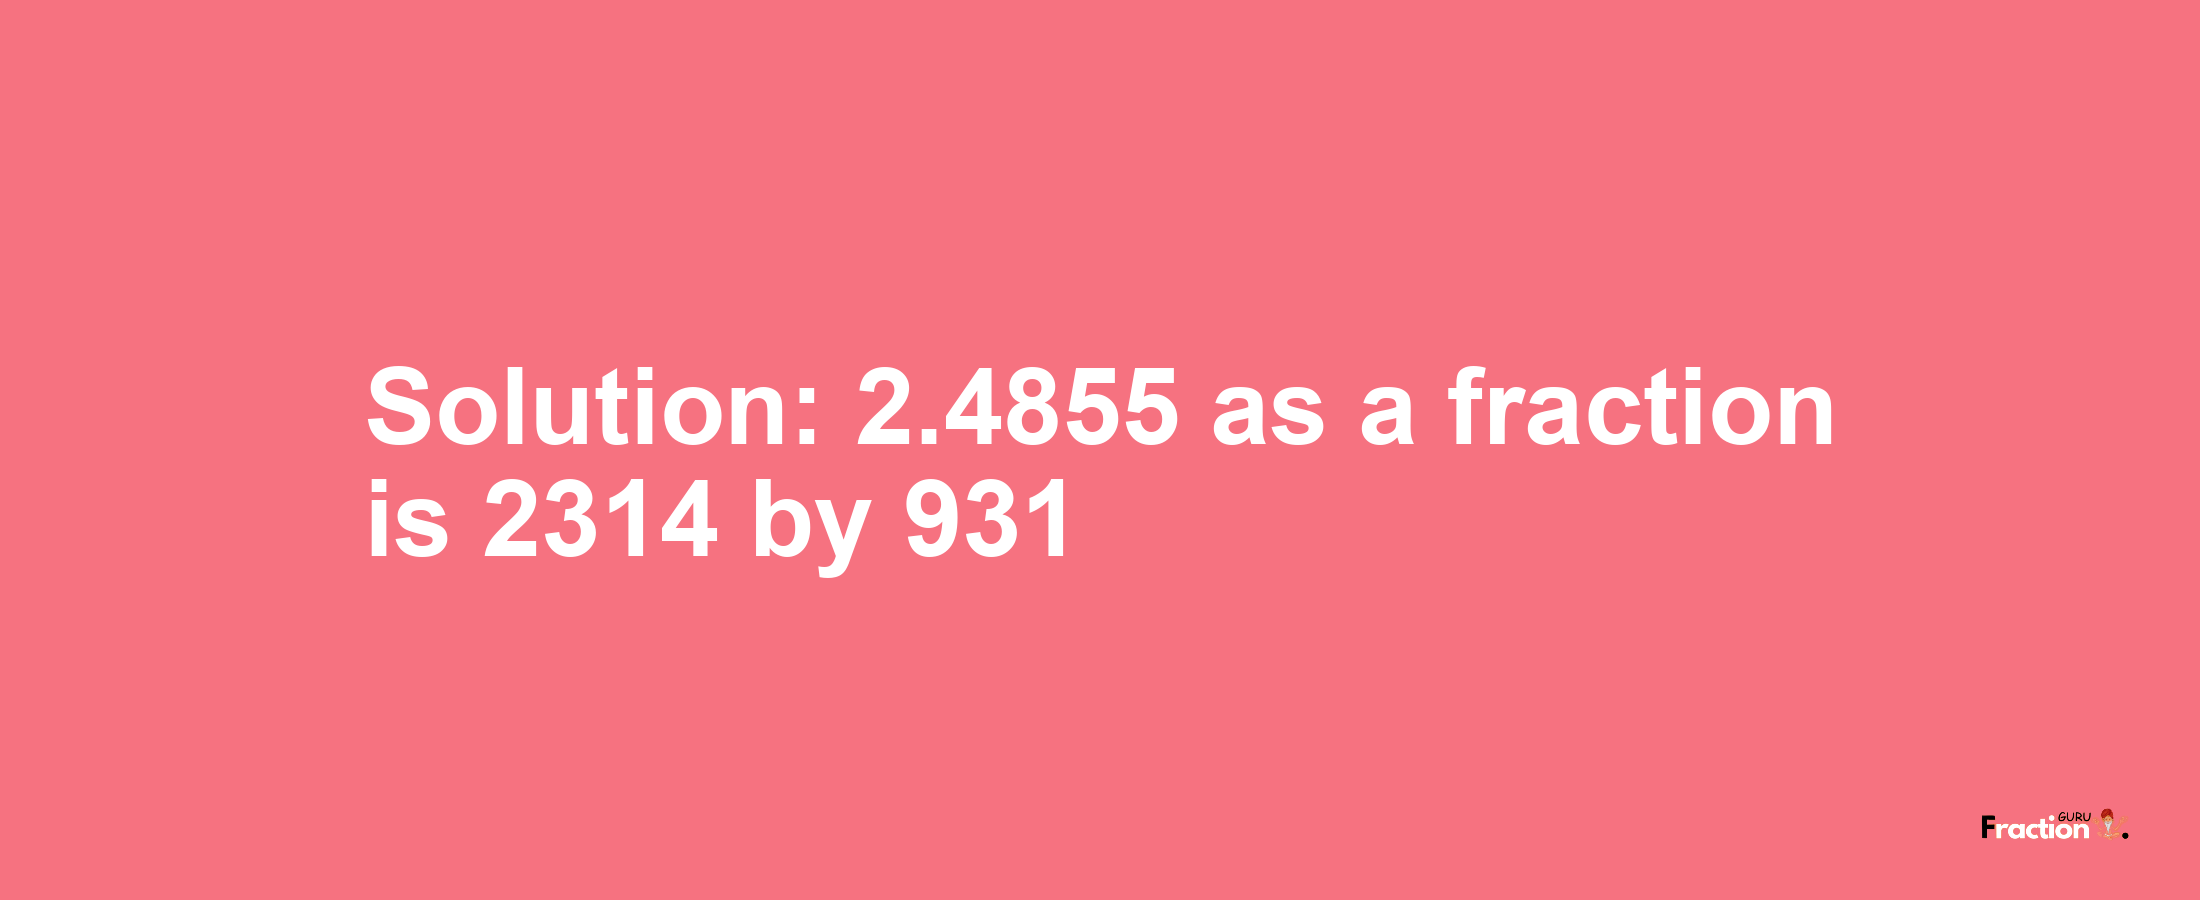 Solution:2.4855 as a fraction is 2314/931